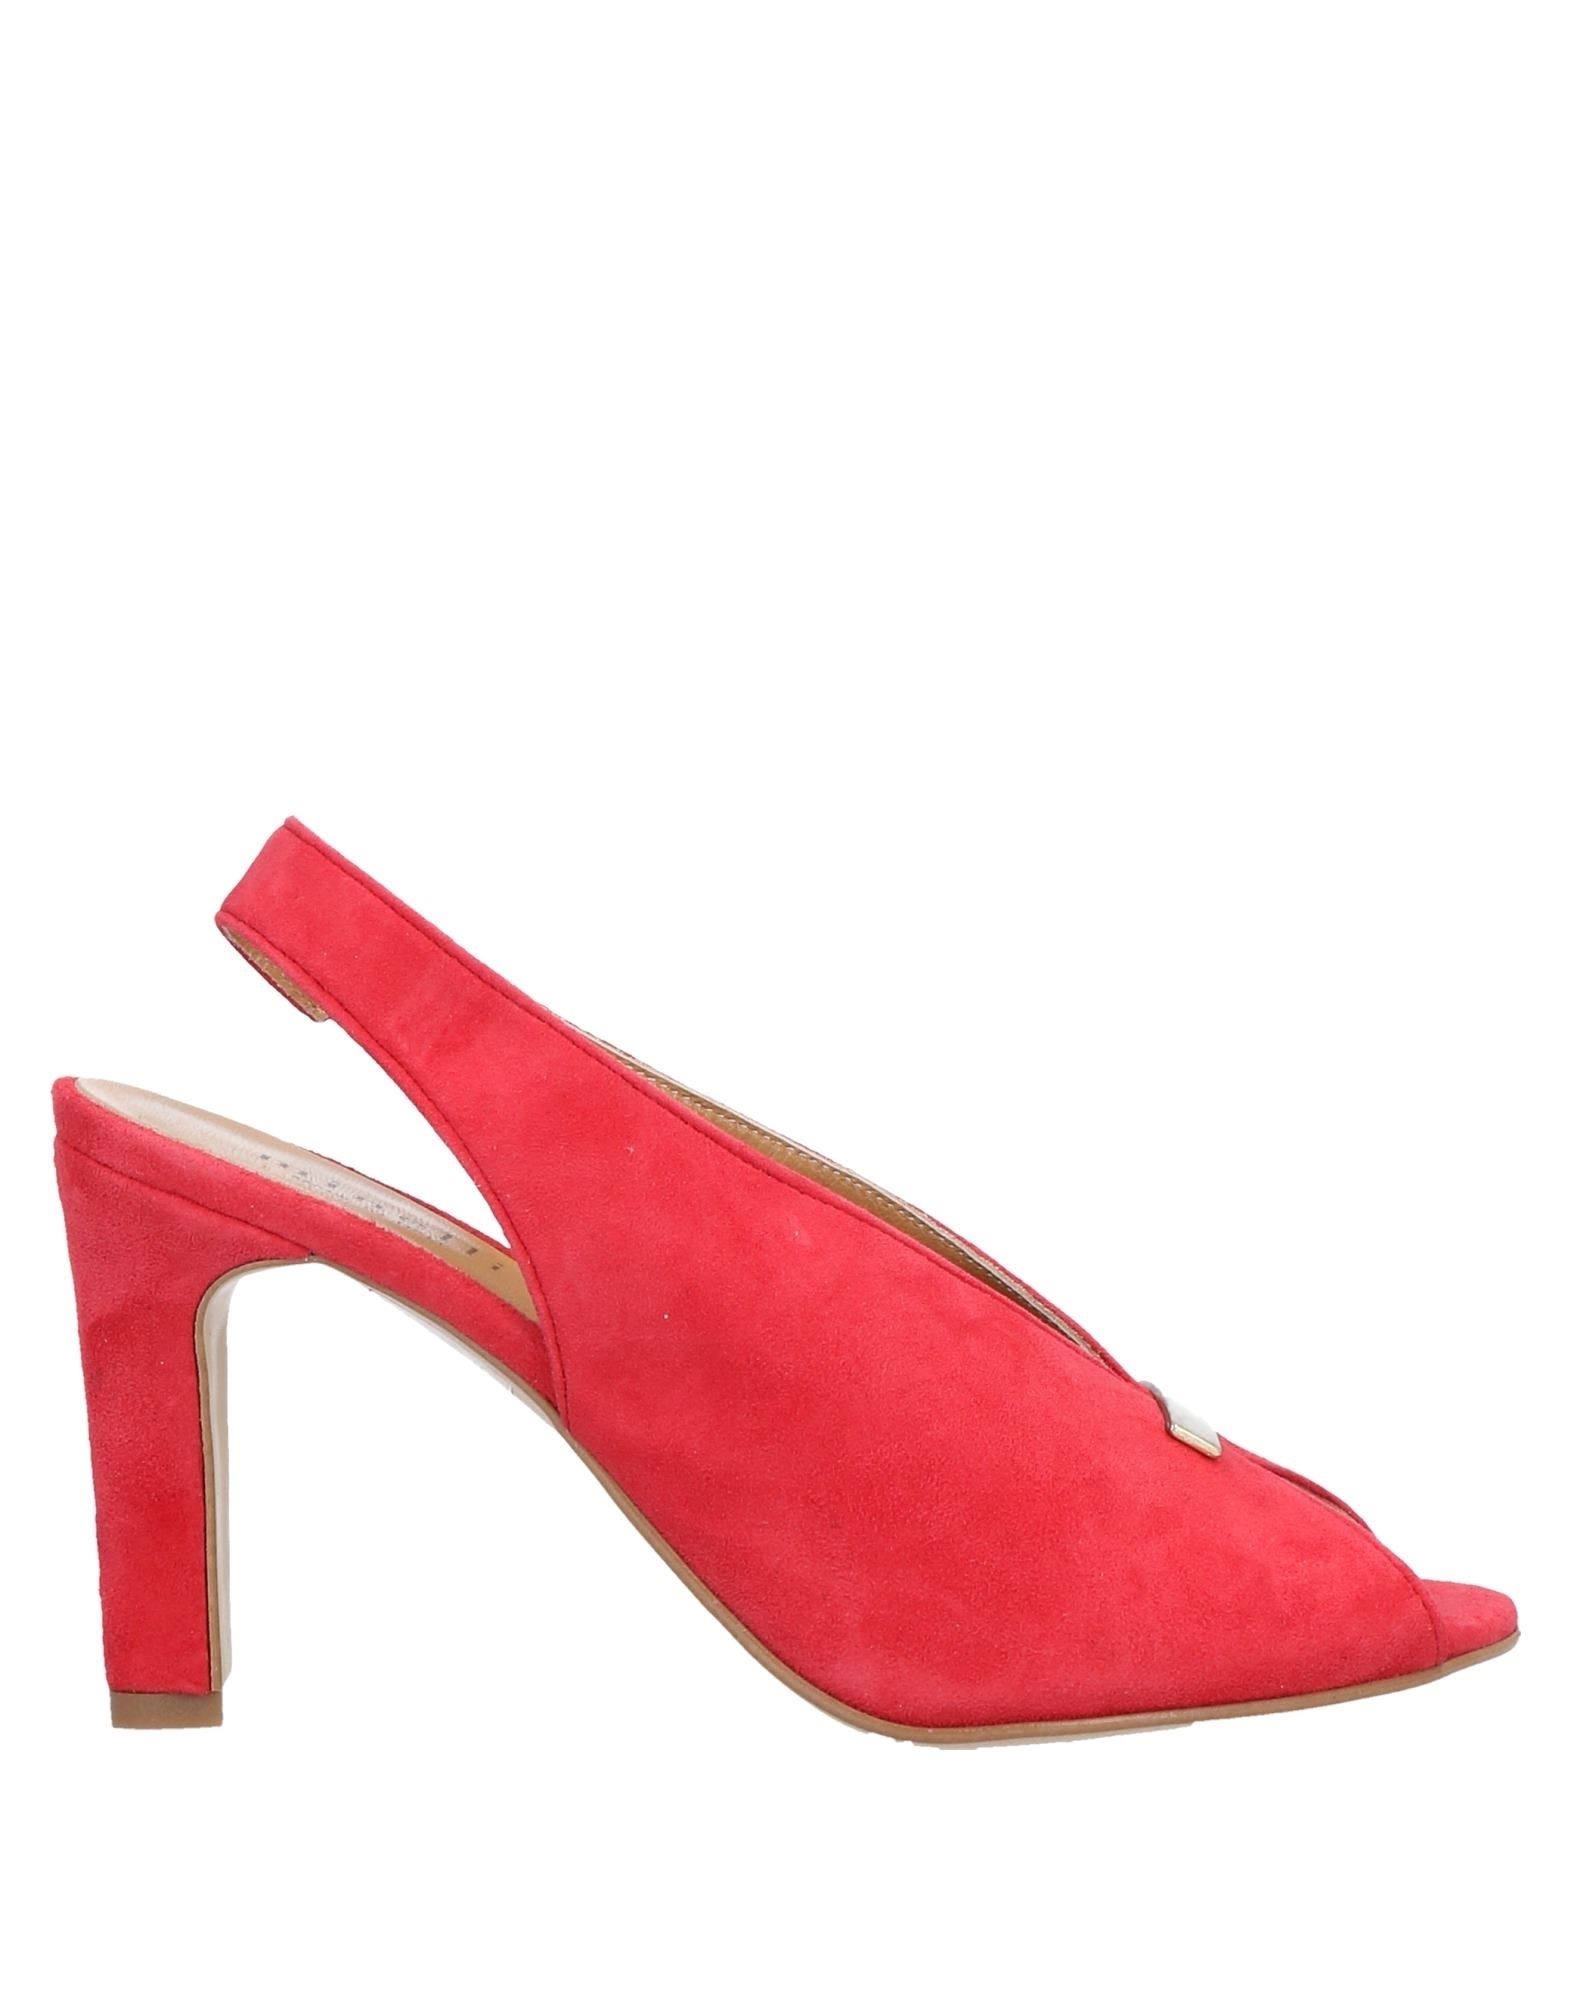 Minelli Sandals In Red